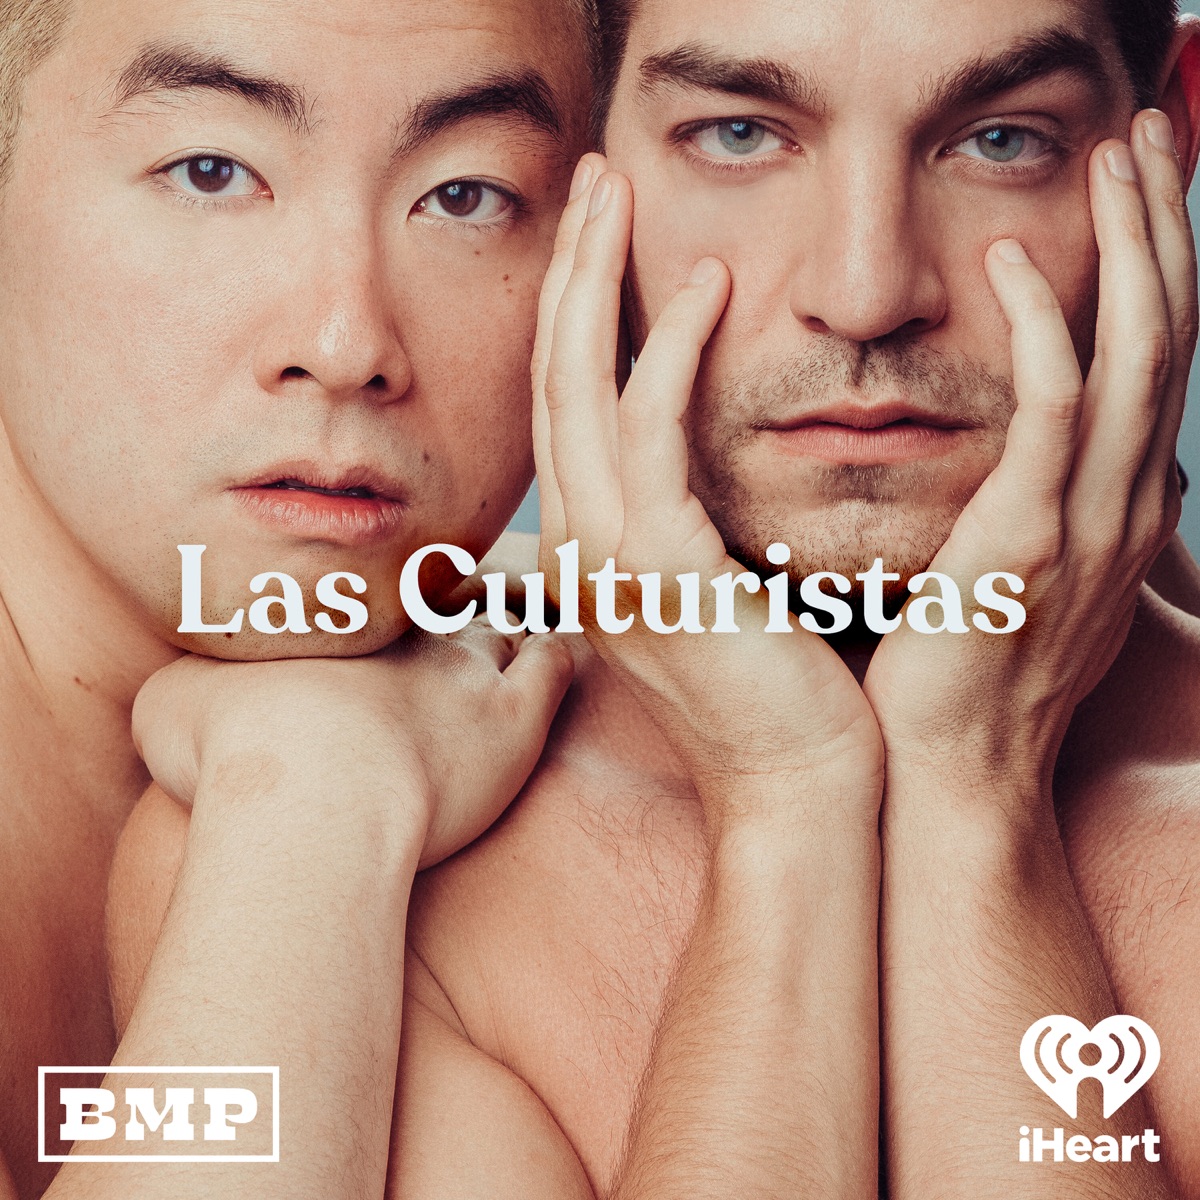 Las Culturistas with Matt Rogers and Bowen Yang – Podcast image